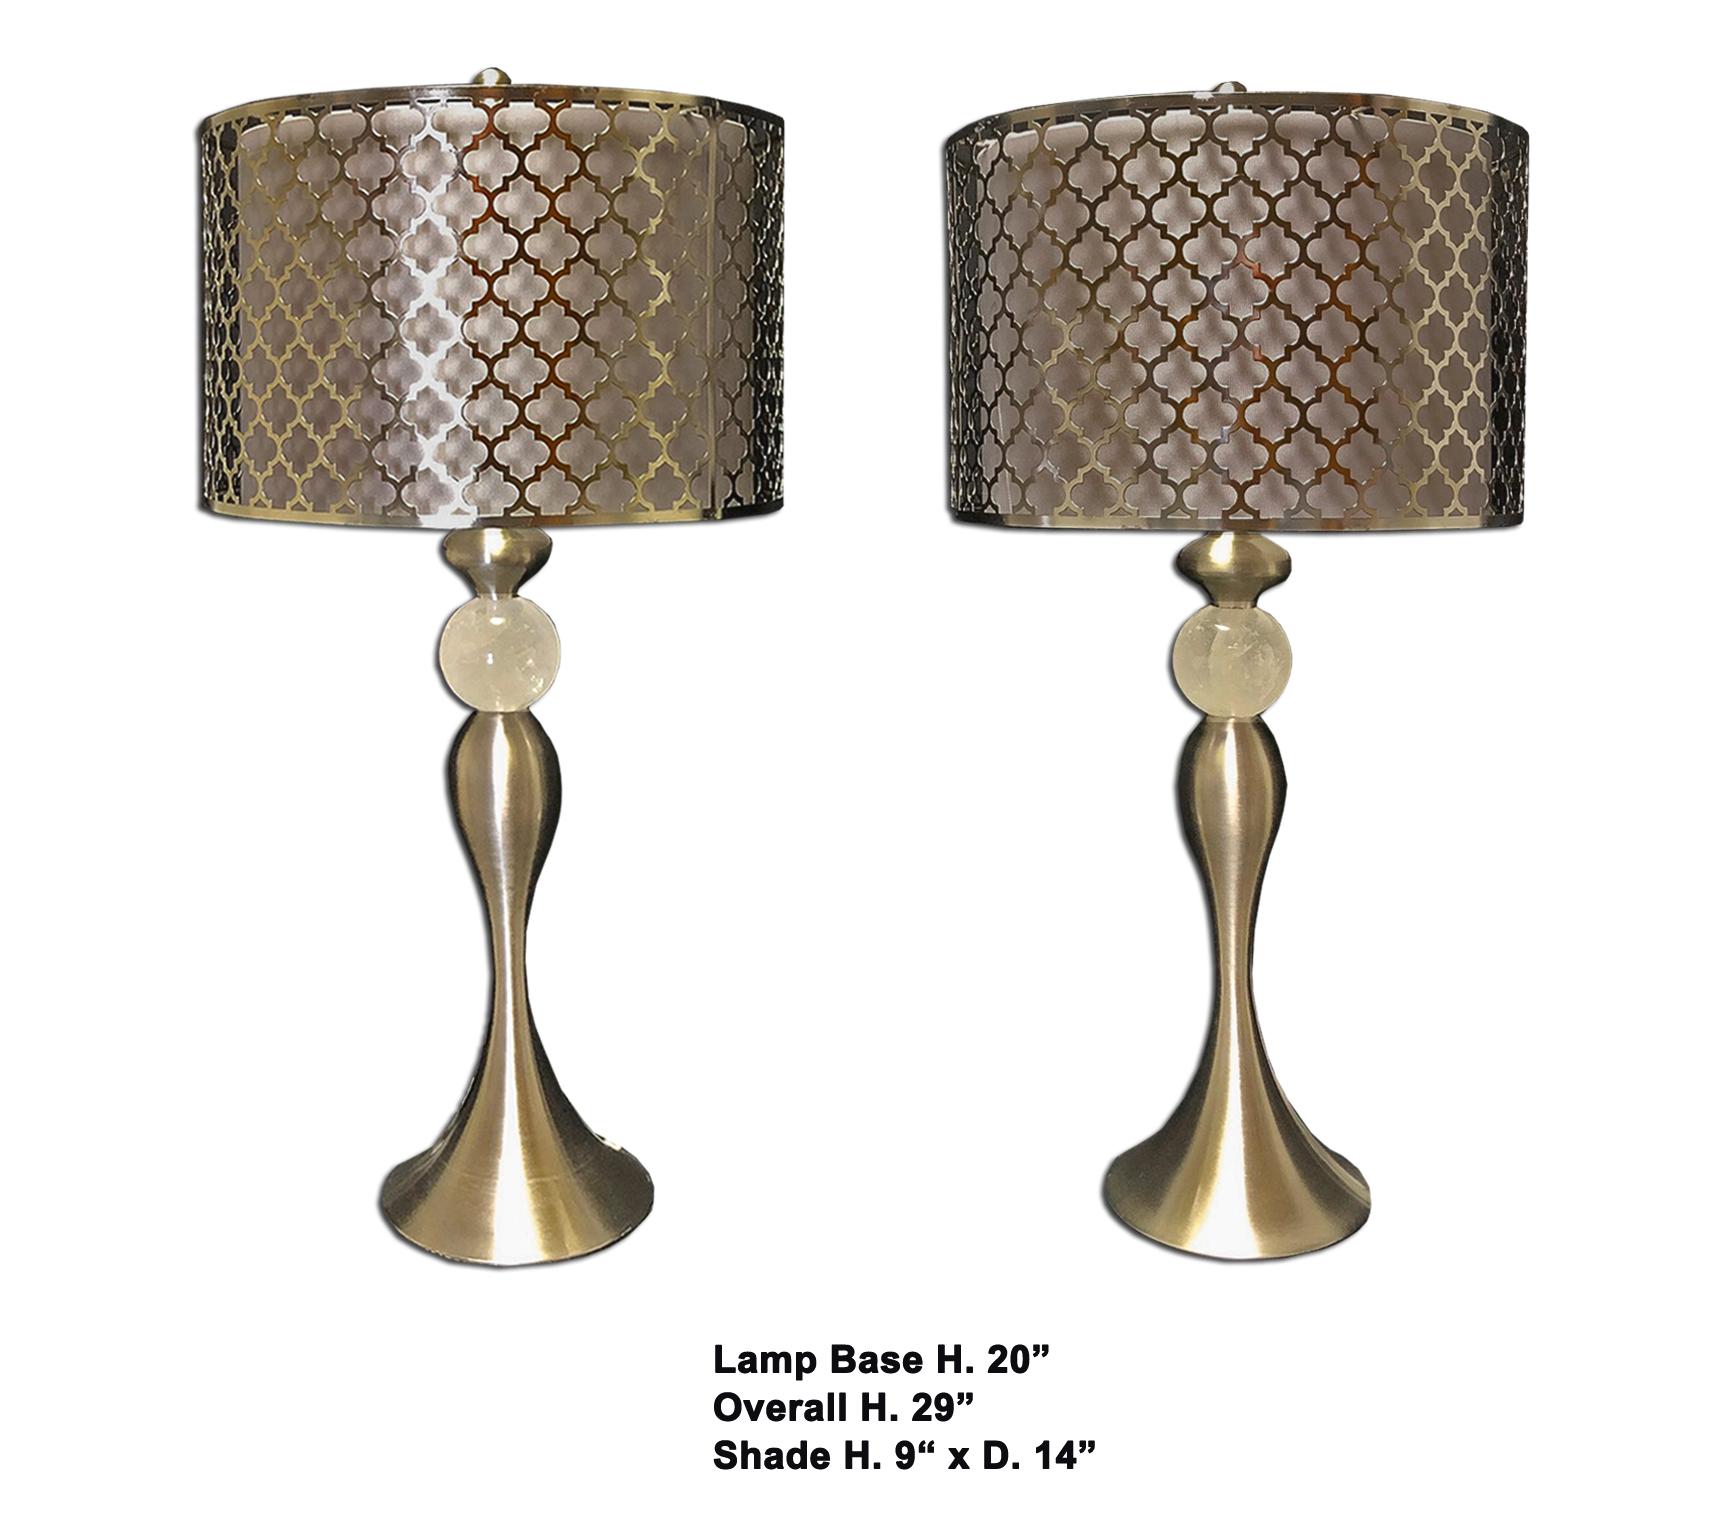 Attractive modern style hand carved and hand polished rock crystal and satin nickel plated table lamps with a two layer pierced fretwork clover patterned shade. 
Late 20th century. 

Shade is included.

 